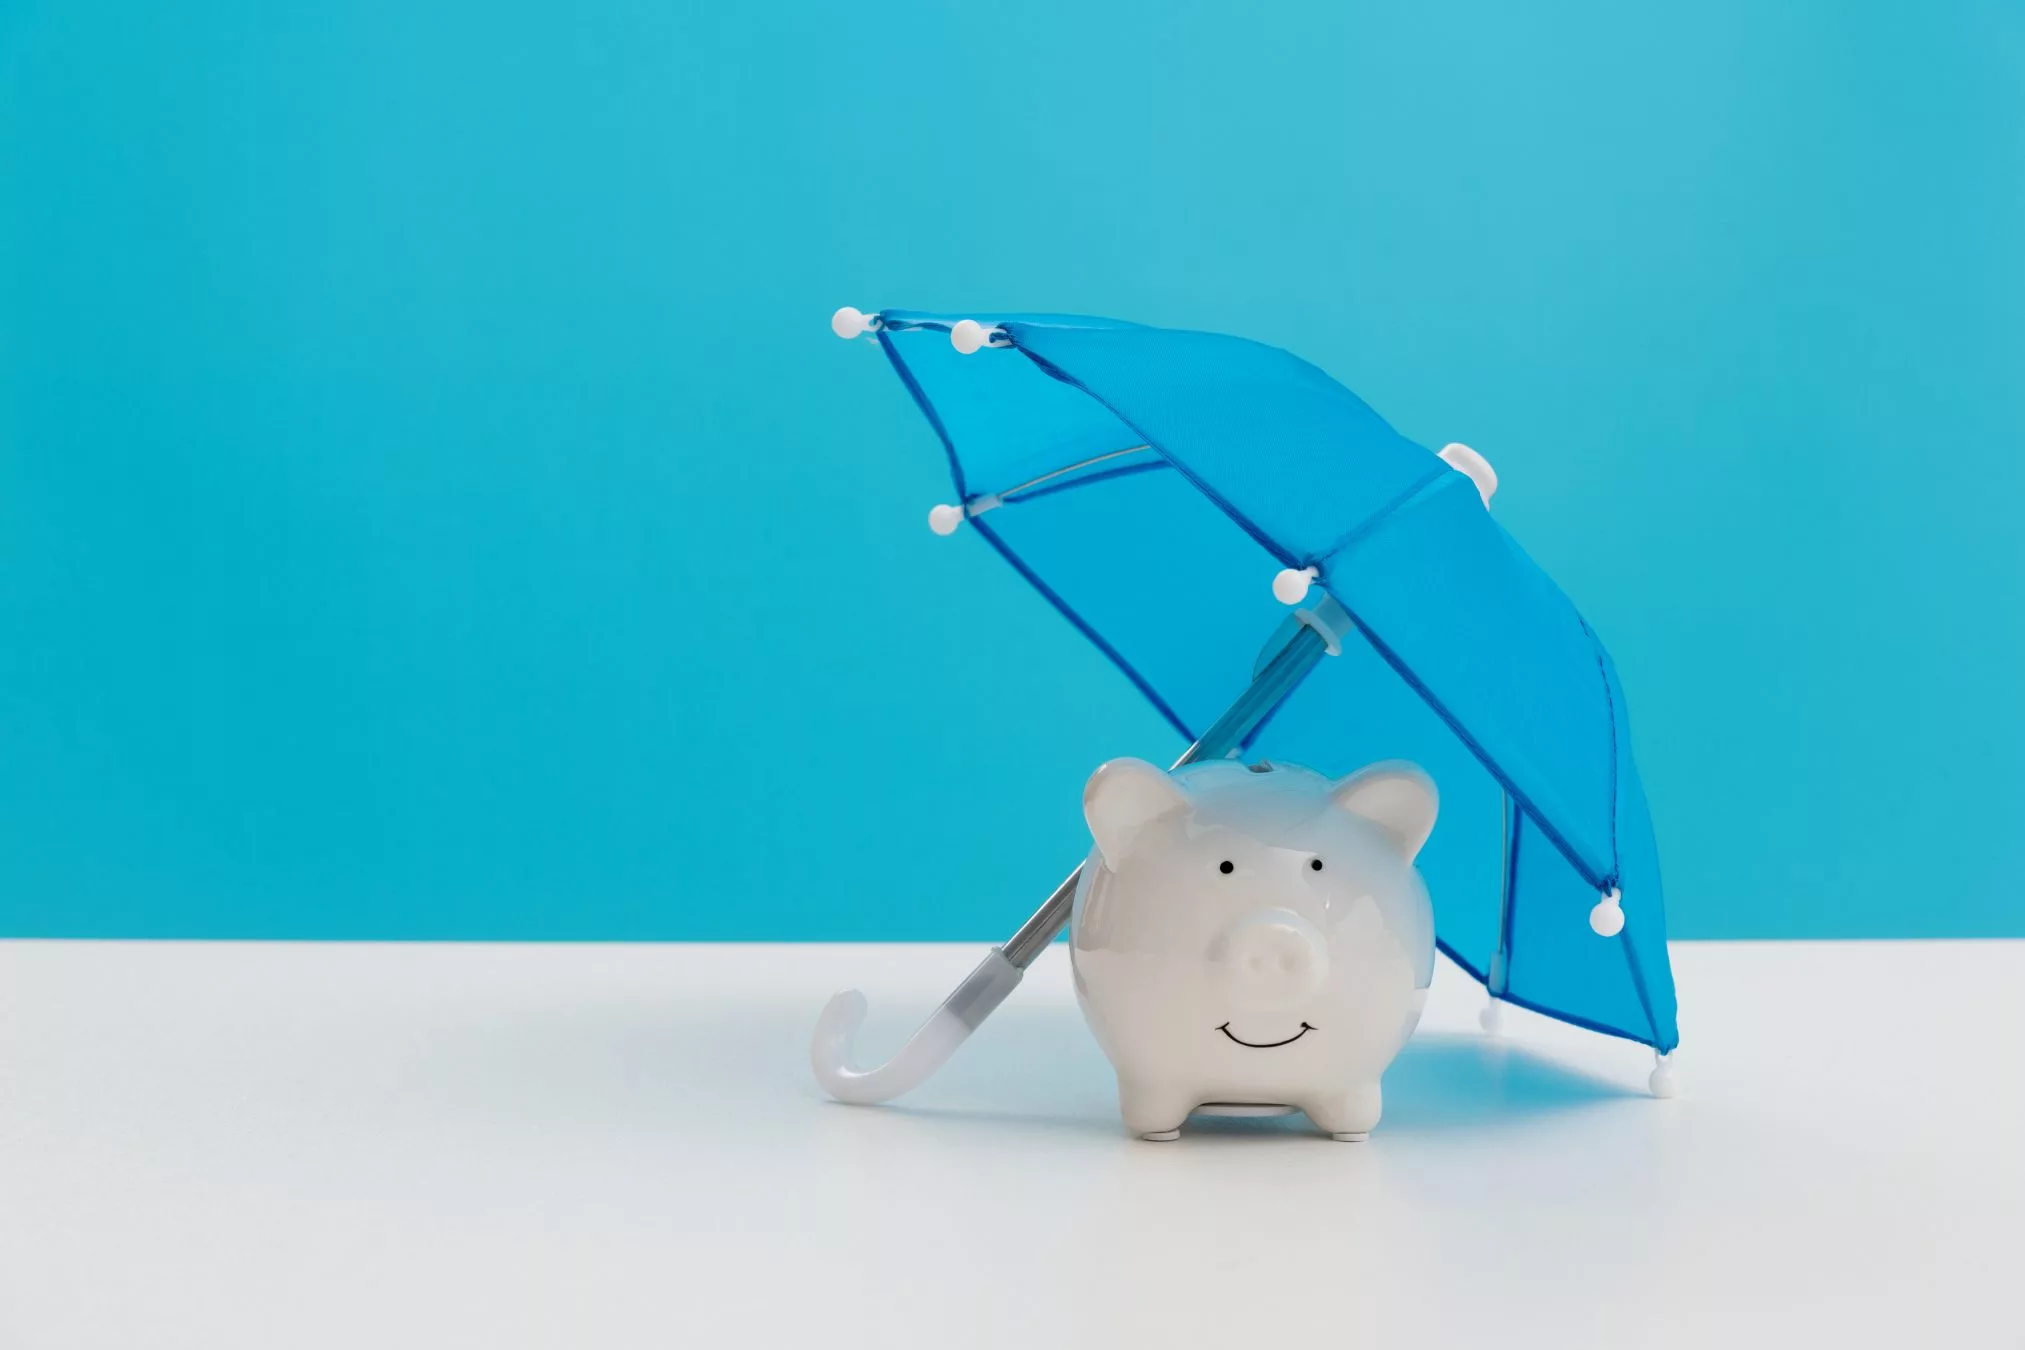 Life insurance claim: image shows a piggy bank with a blue umbrella above it.